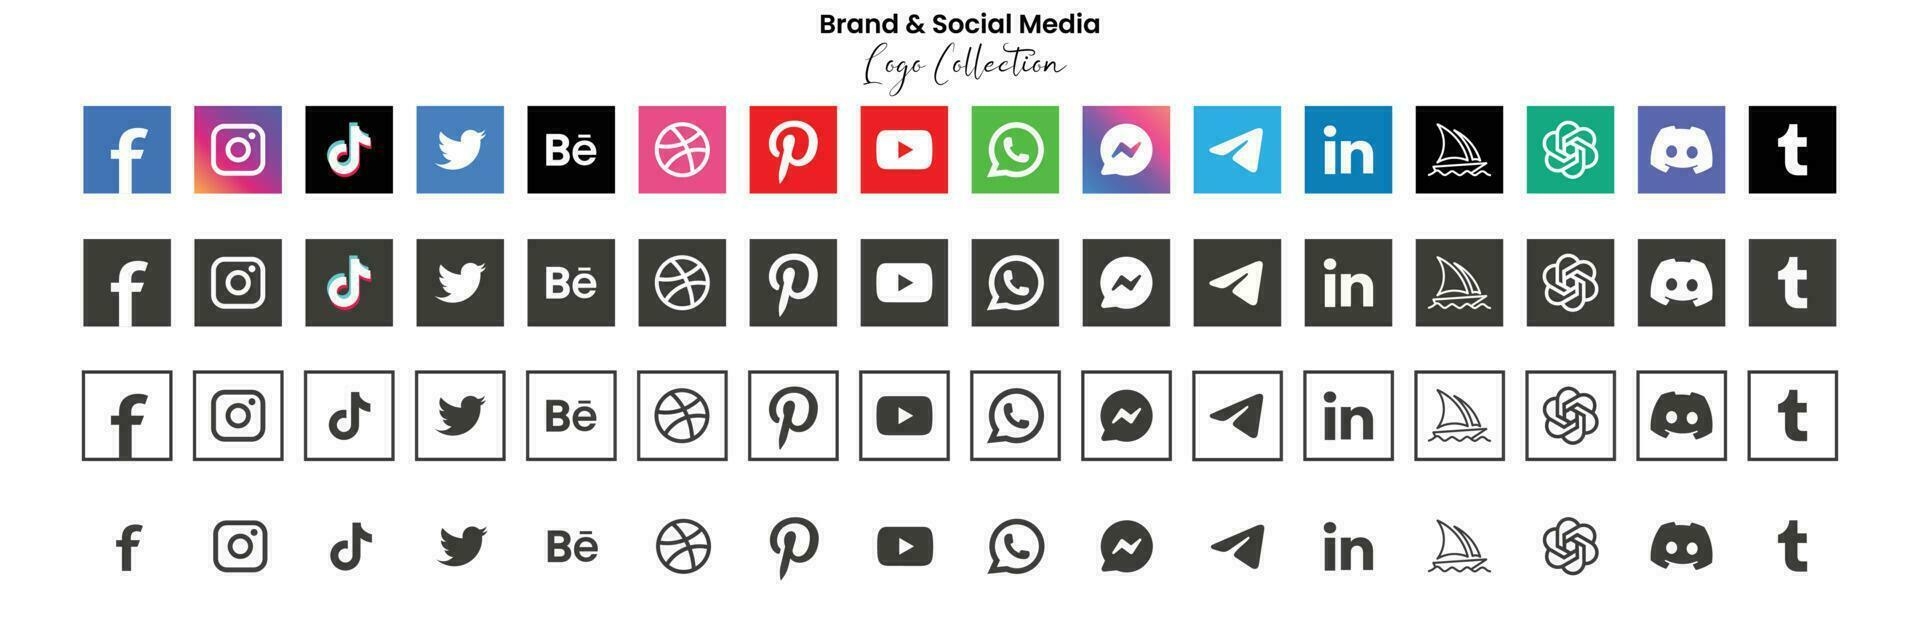 Popular social network symbols, social media logo icons collection, instagram, facebook, twitter, youtube, chatgpt, midjourney, discord and etc. social media icons vector